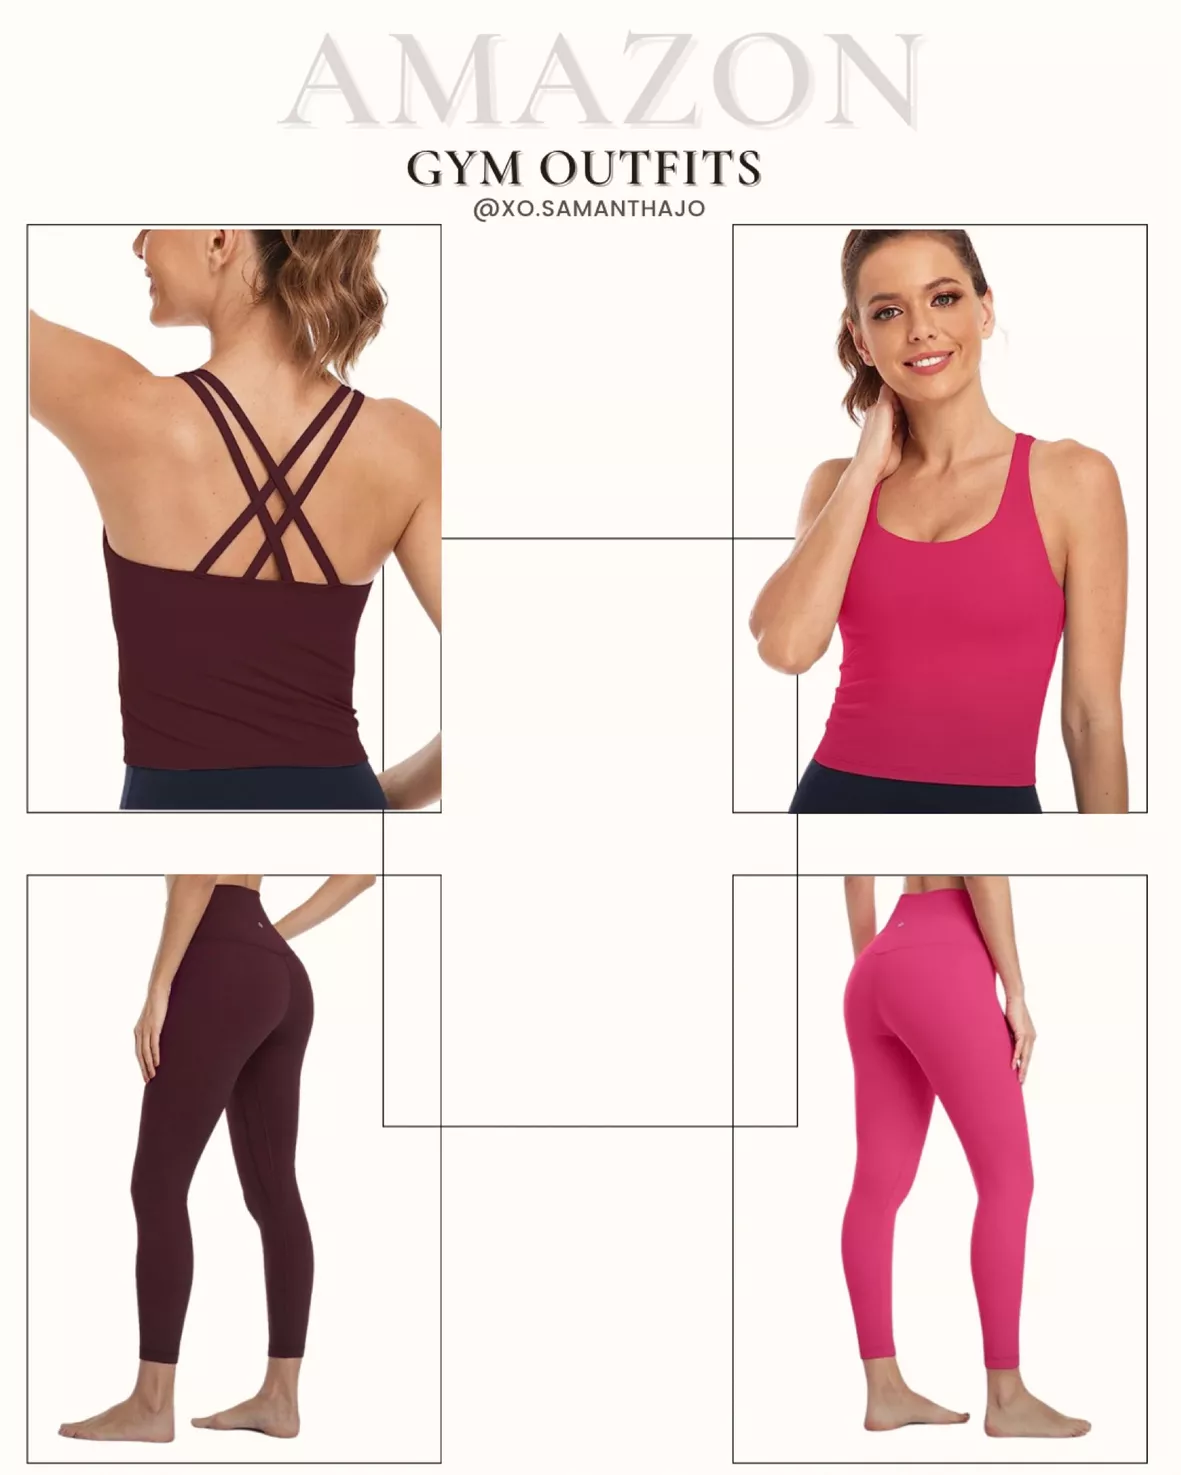 Comfy Outfits idea, women's fitness wear